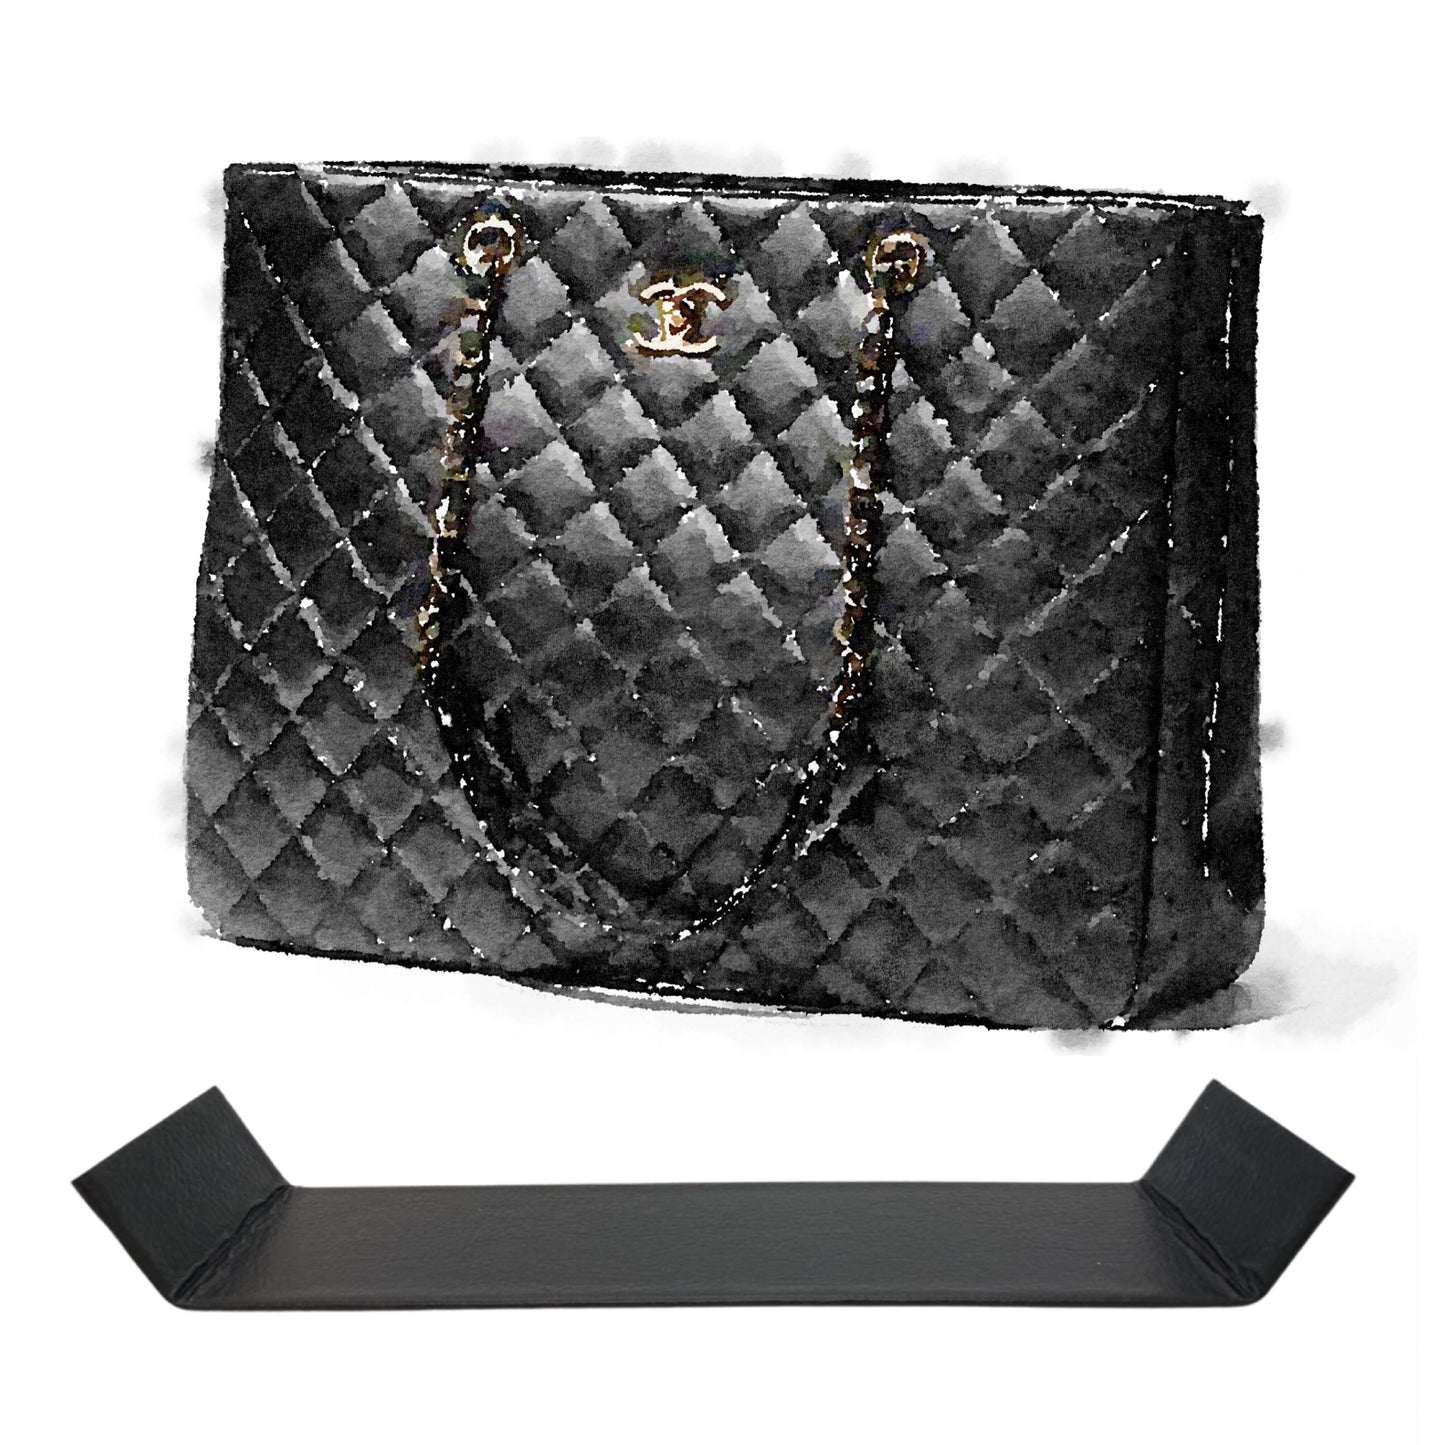 Base Shaper / Bag Insert Saver For CHANEL Timeless Classic Tote